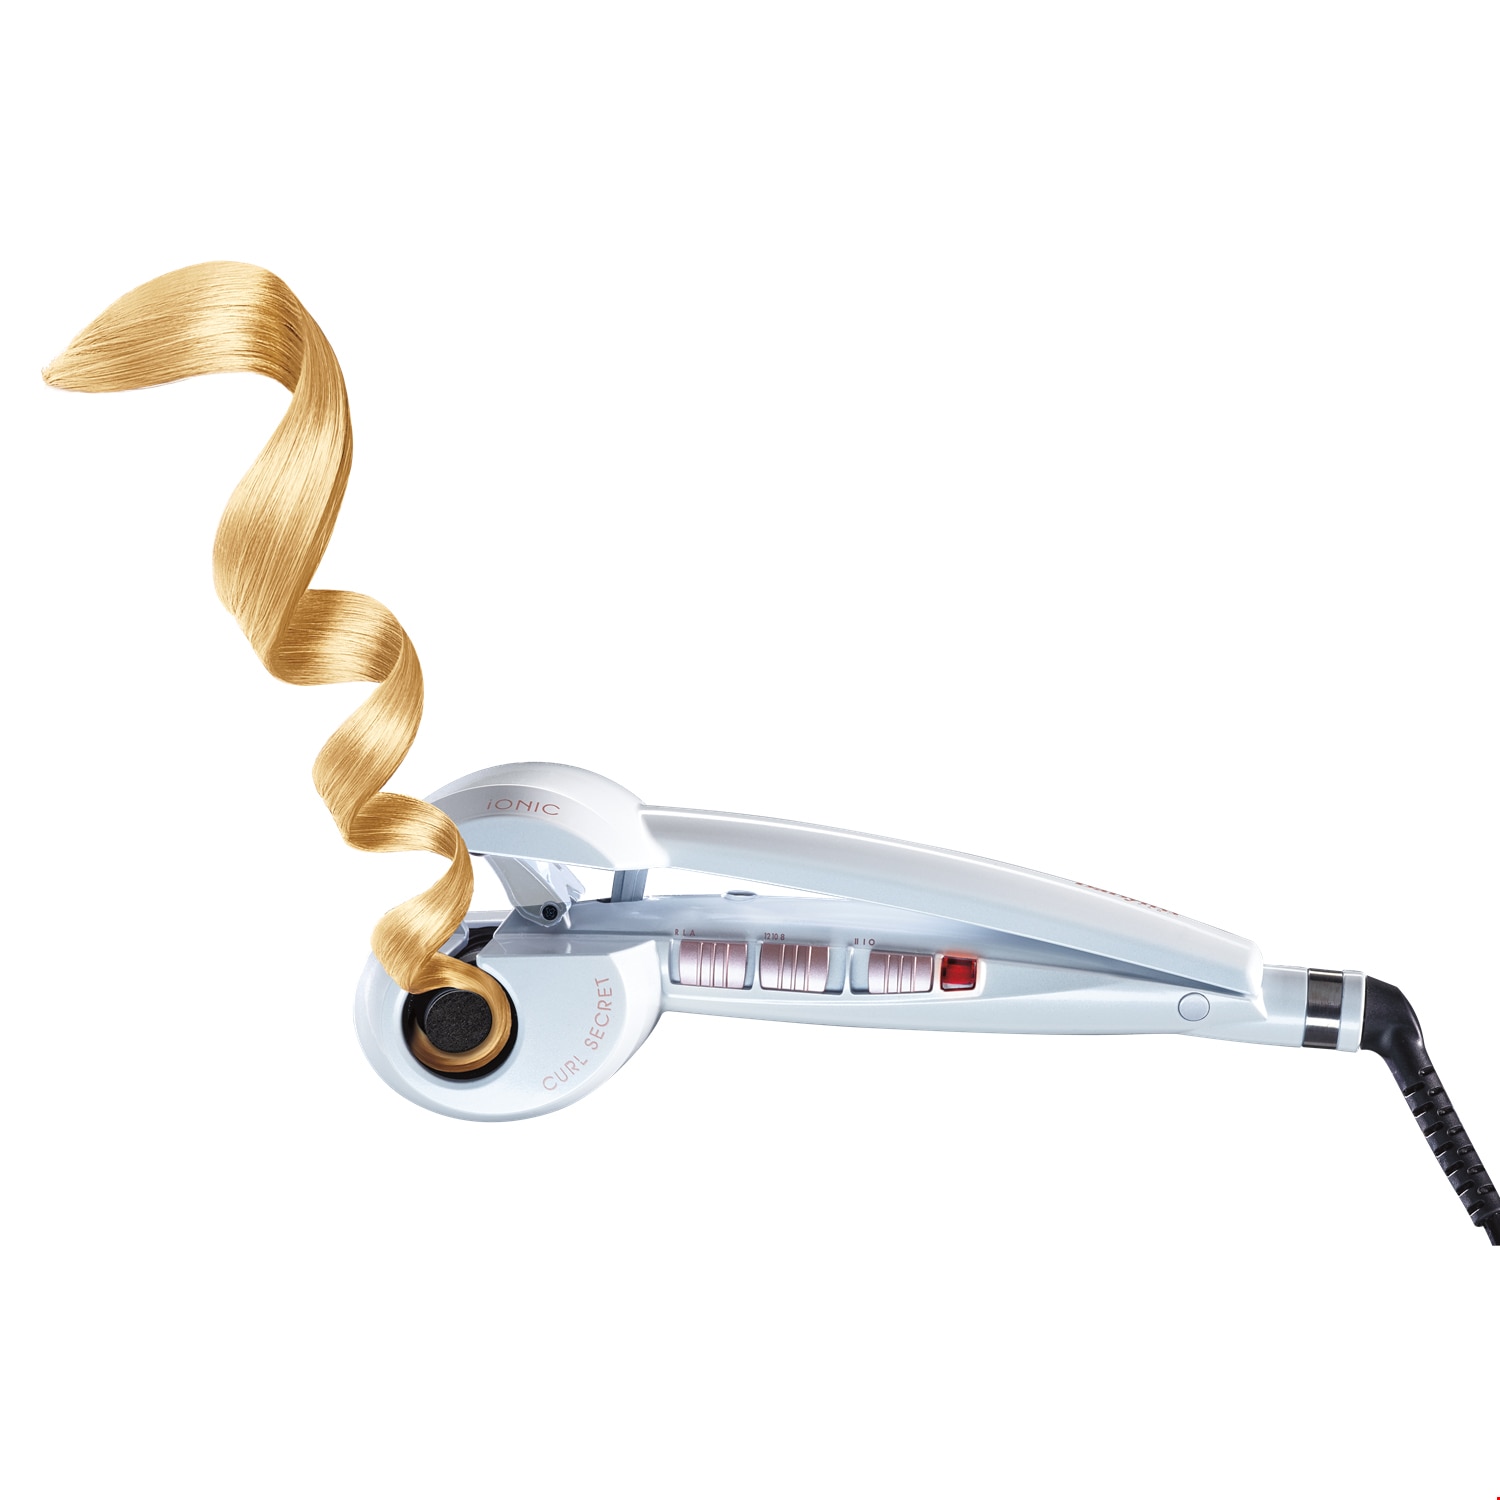 Curl e. BABYLISS Curl Ionic. BABYLISS c452e. BABYLISS массажер для головы. BABYLISS Pro массажёр для головы.